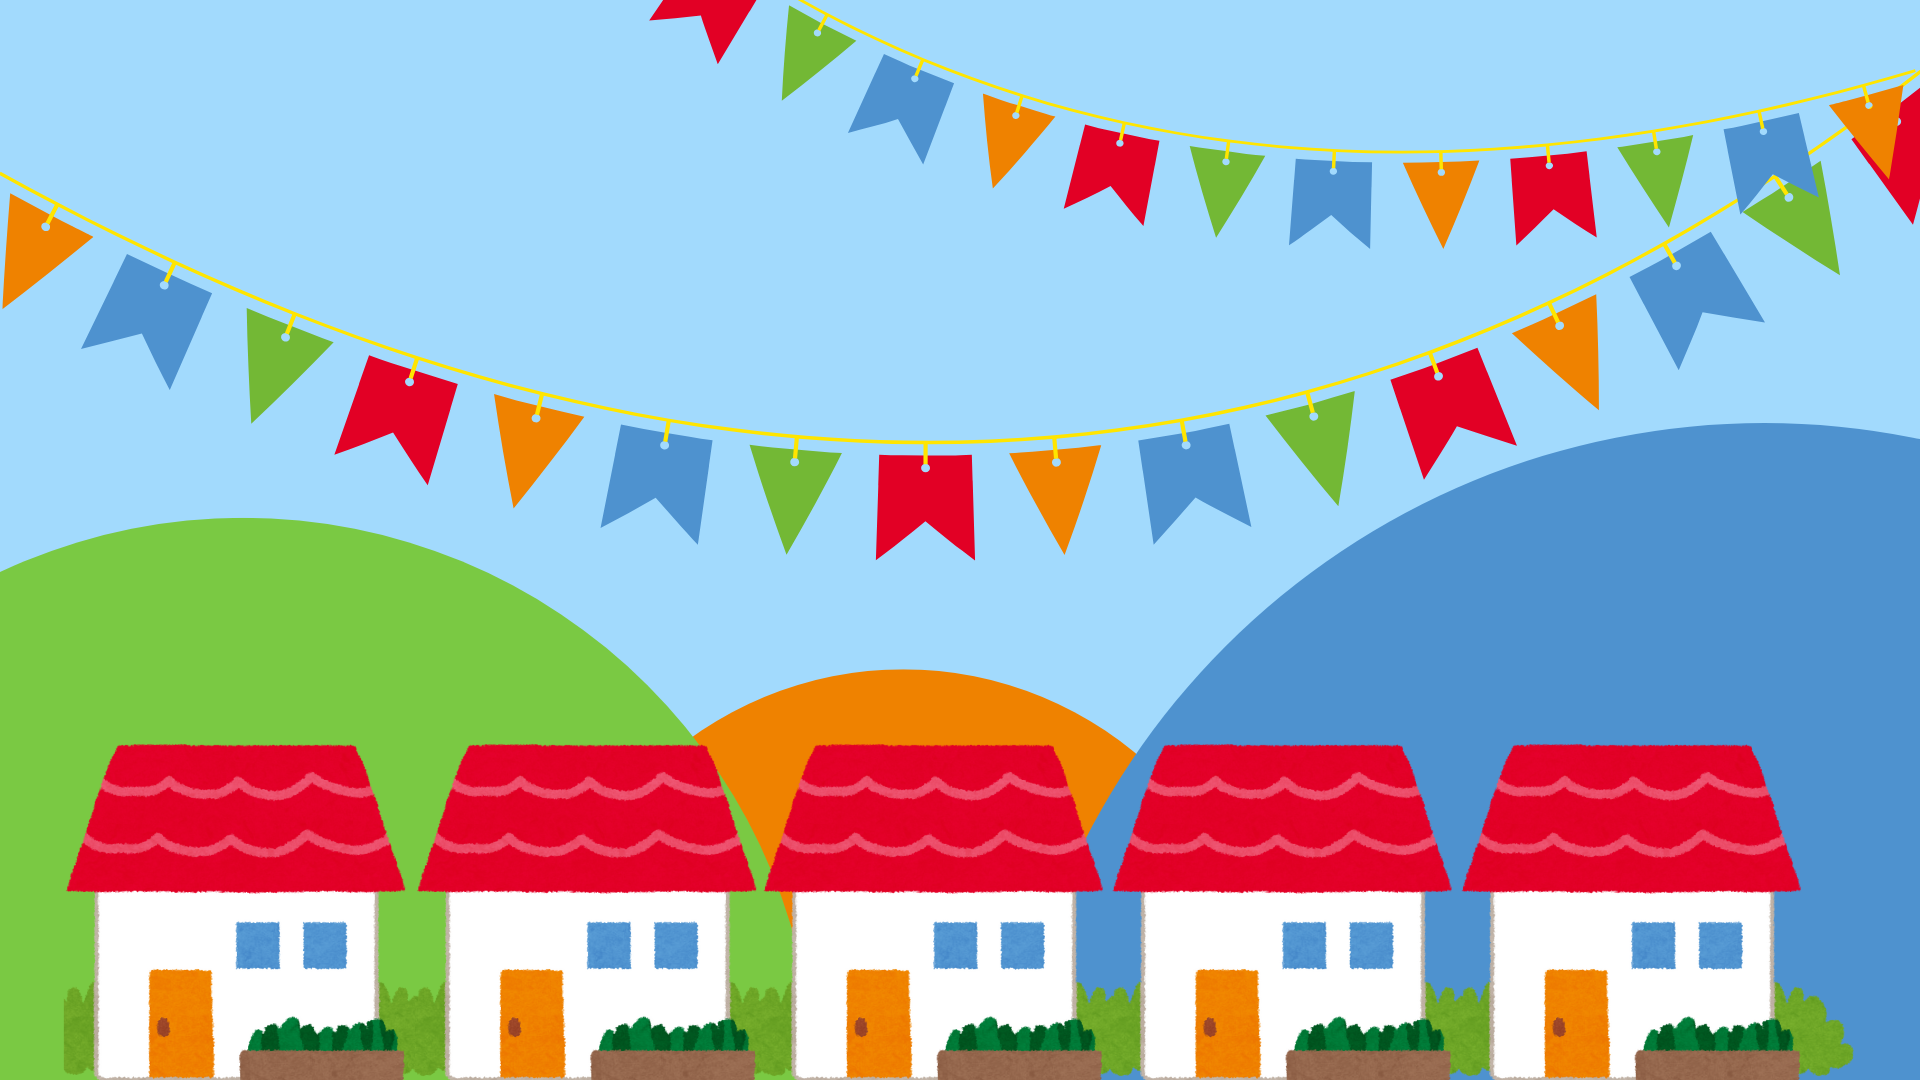 row of houses on a green, blue, and orange background with party banners above